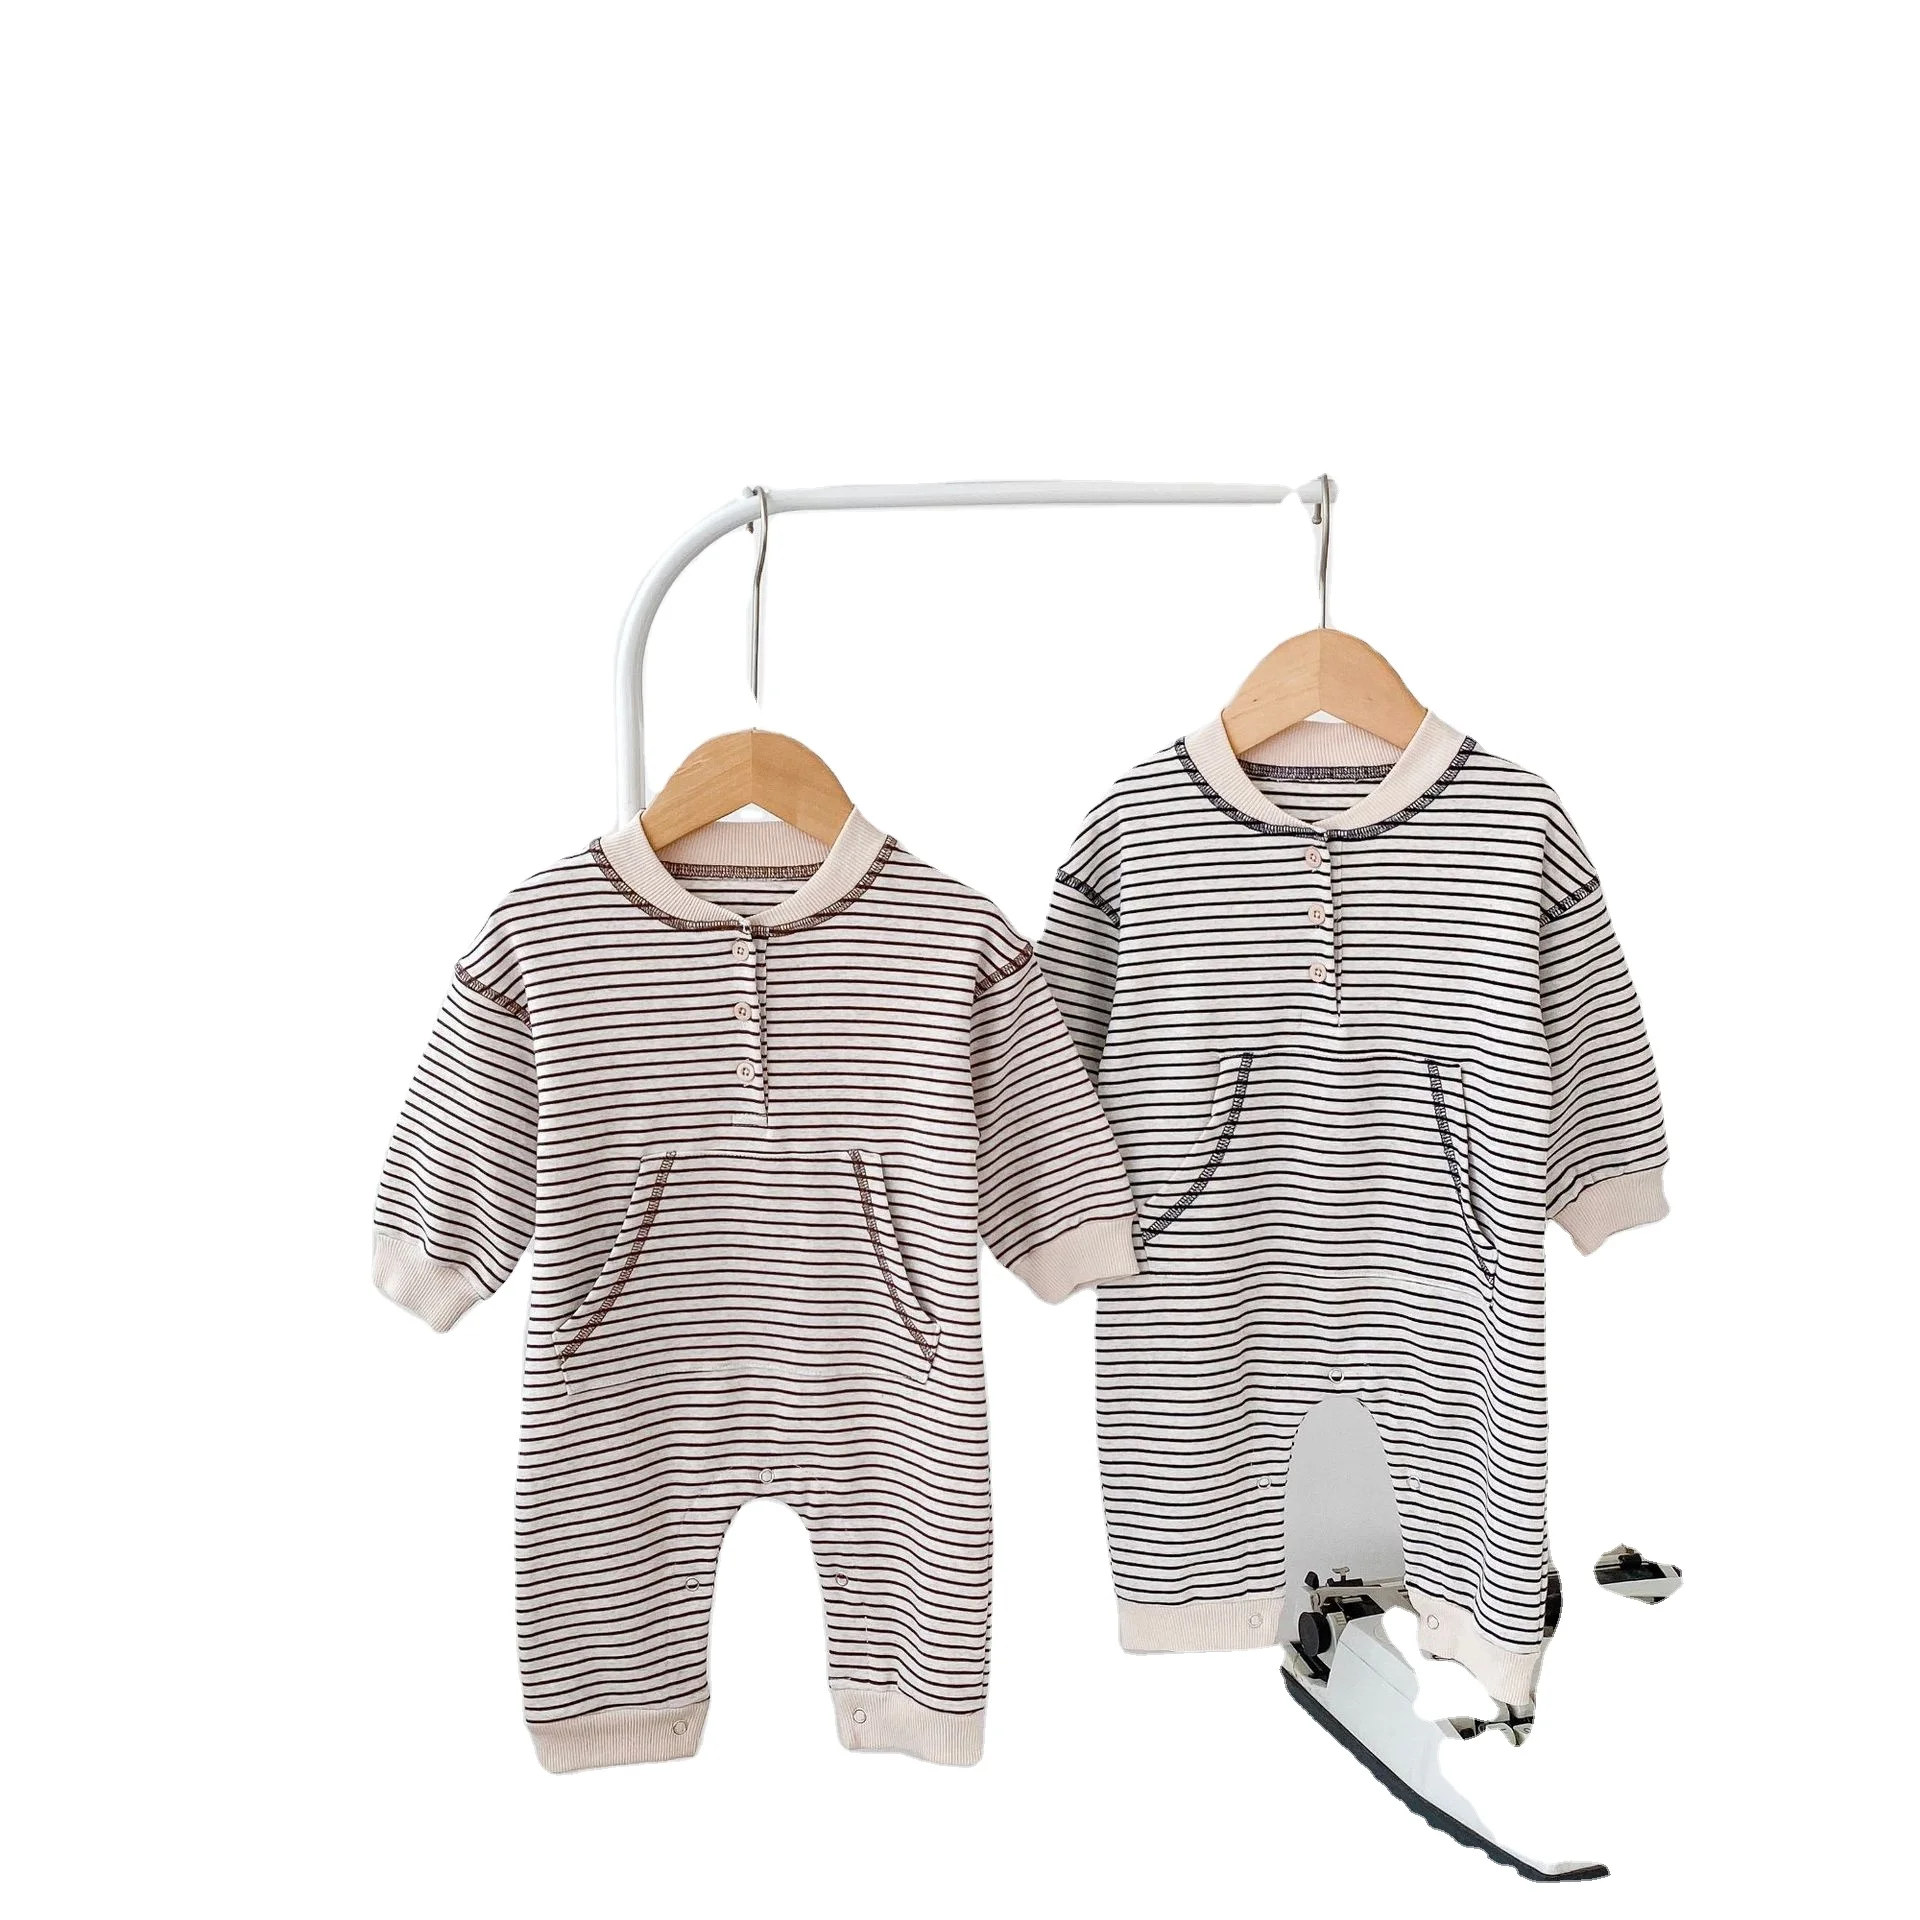 

EGFS Australia US Autumn Babies Jumpsuits Long Sleeved Cotton Newborn Climb Clothes Front Pockets Striped Toddler Boys Bodysuits, As shown